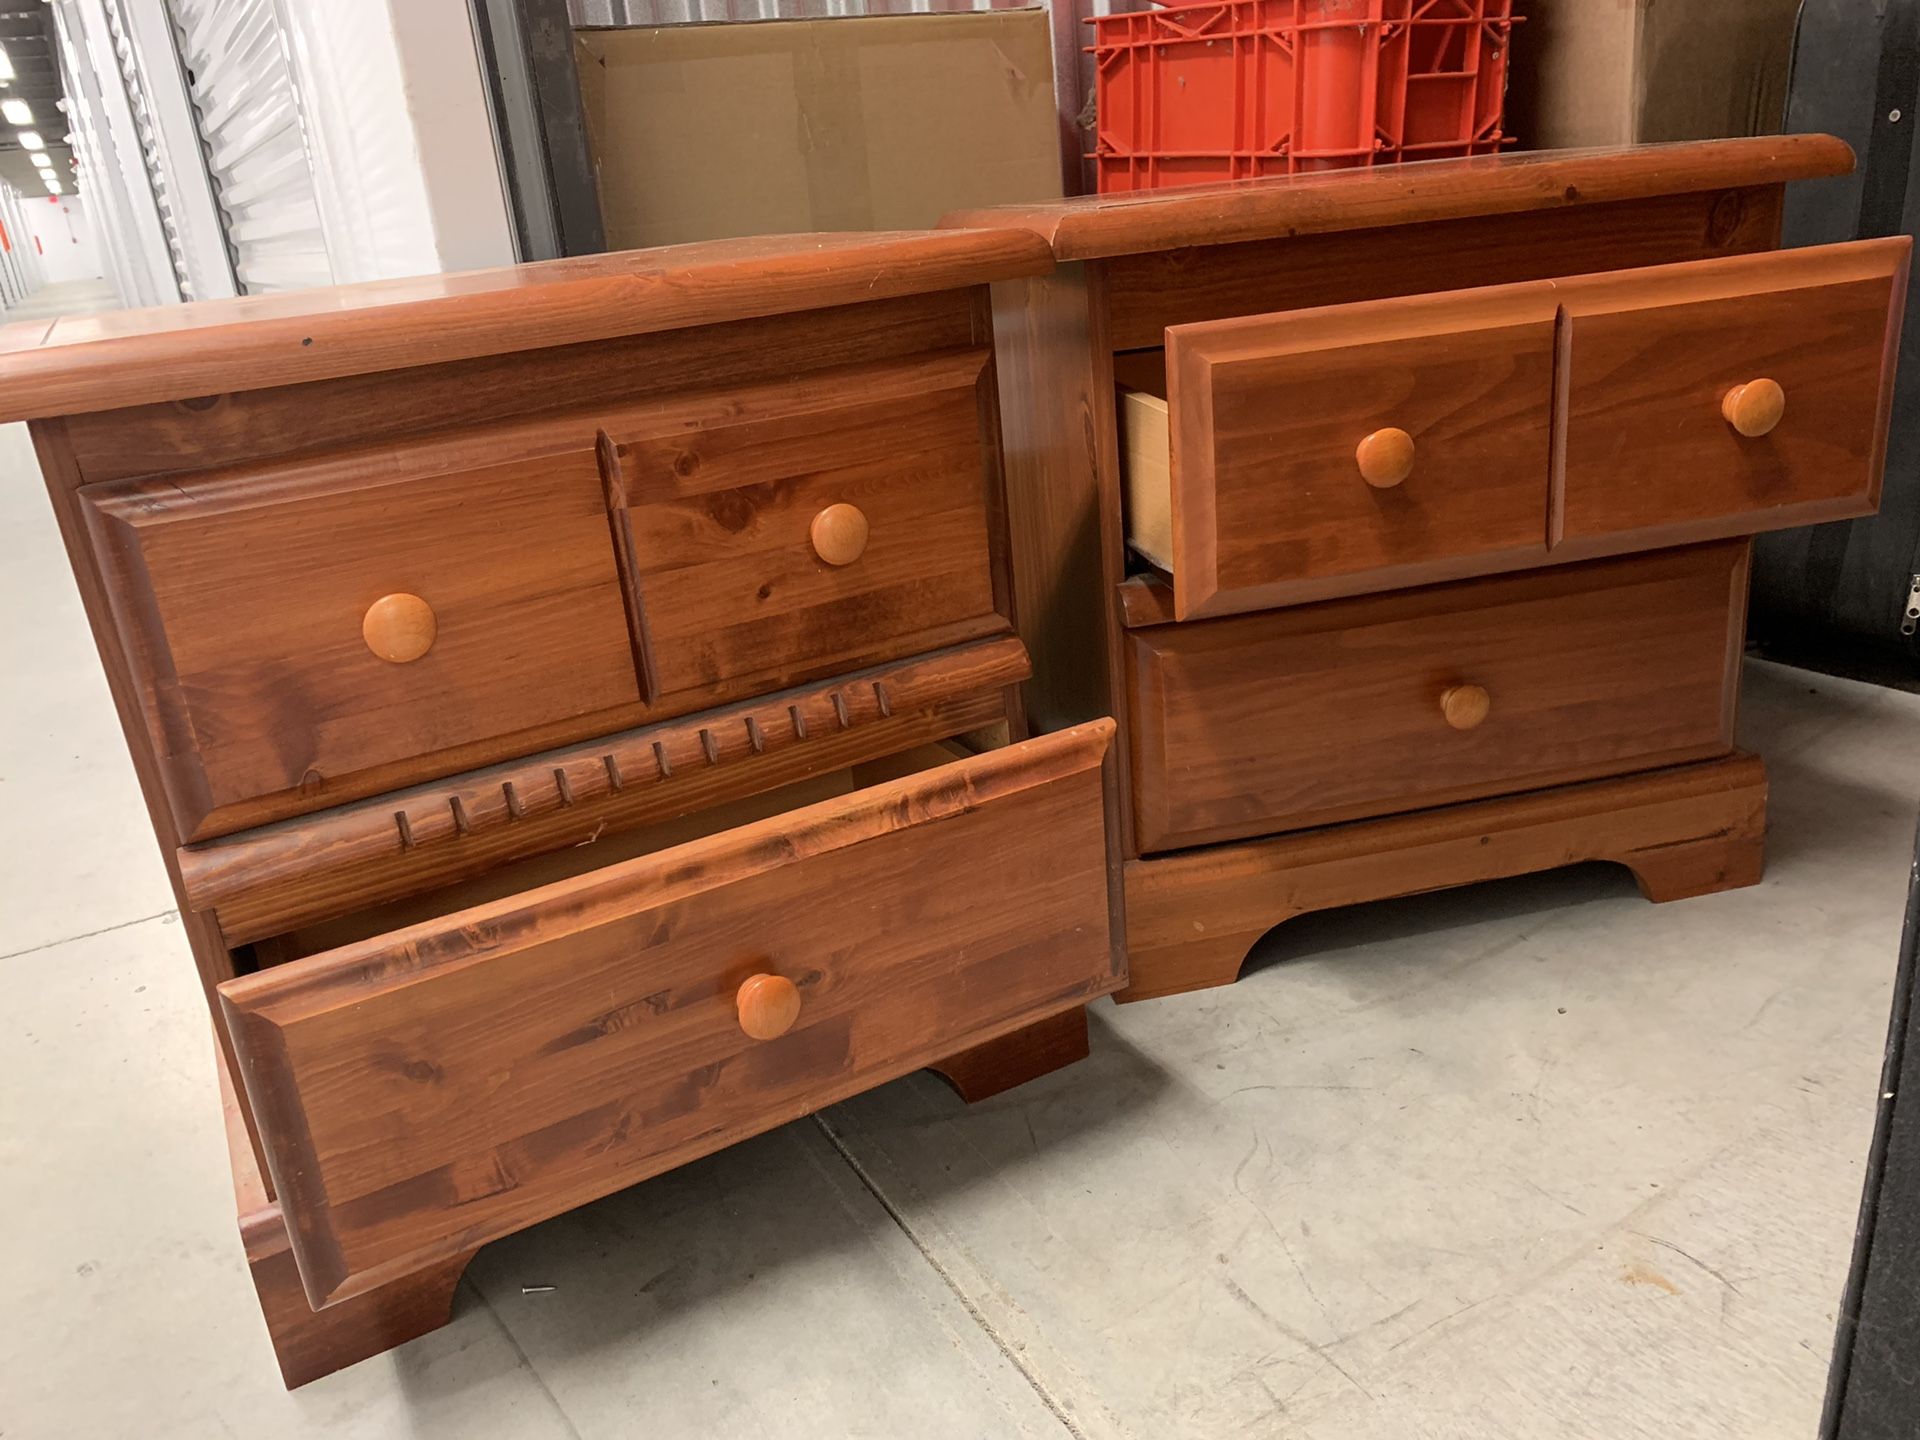 Two bedroom night stands with spacious drawers